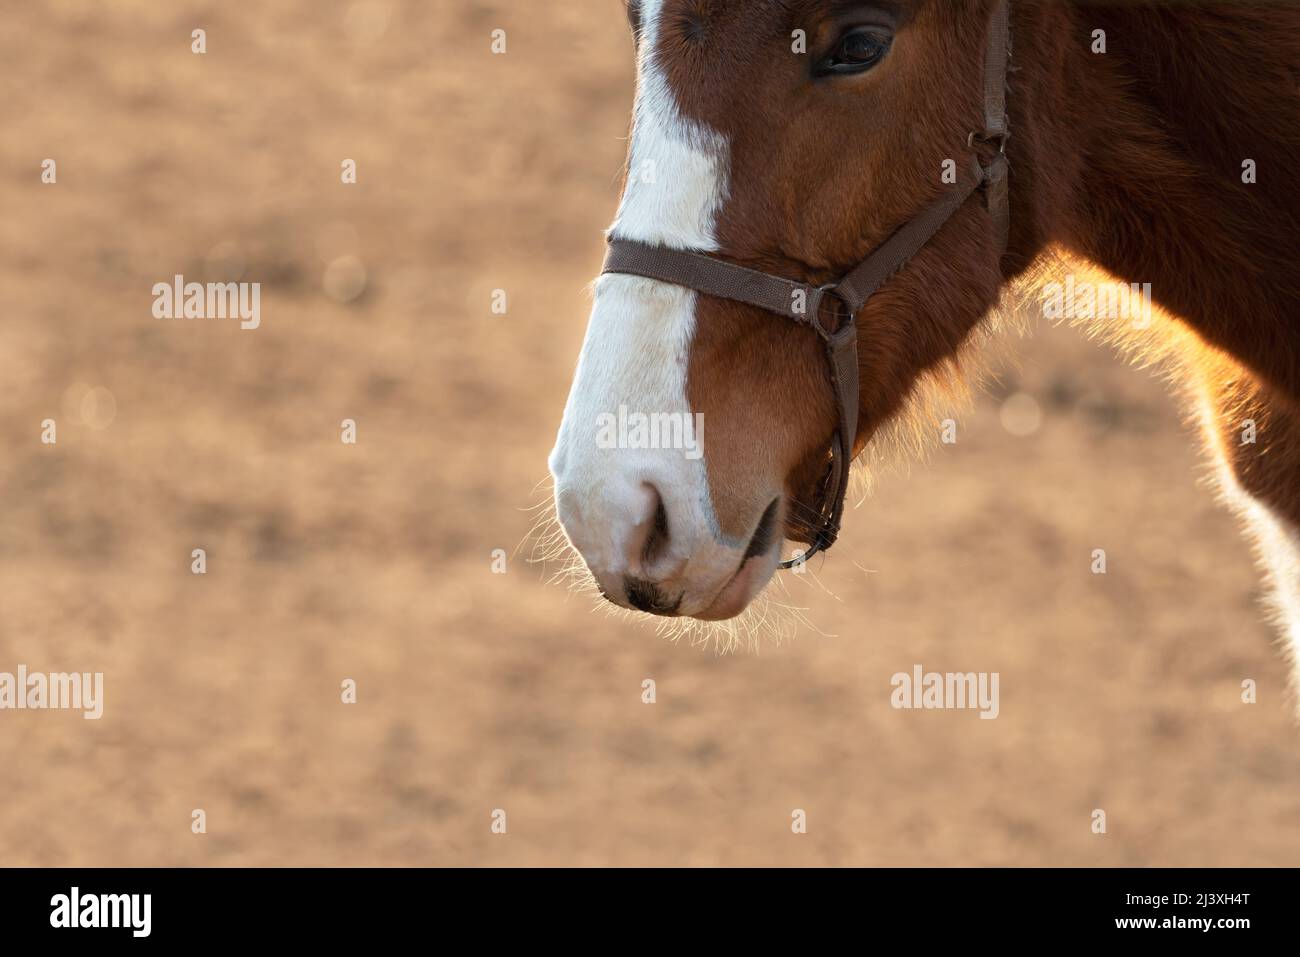 Beautiful brown horse shining in the afternoon sun. Horse headshot. Stock Photo